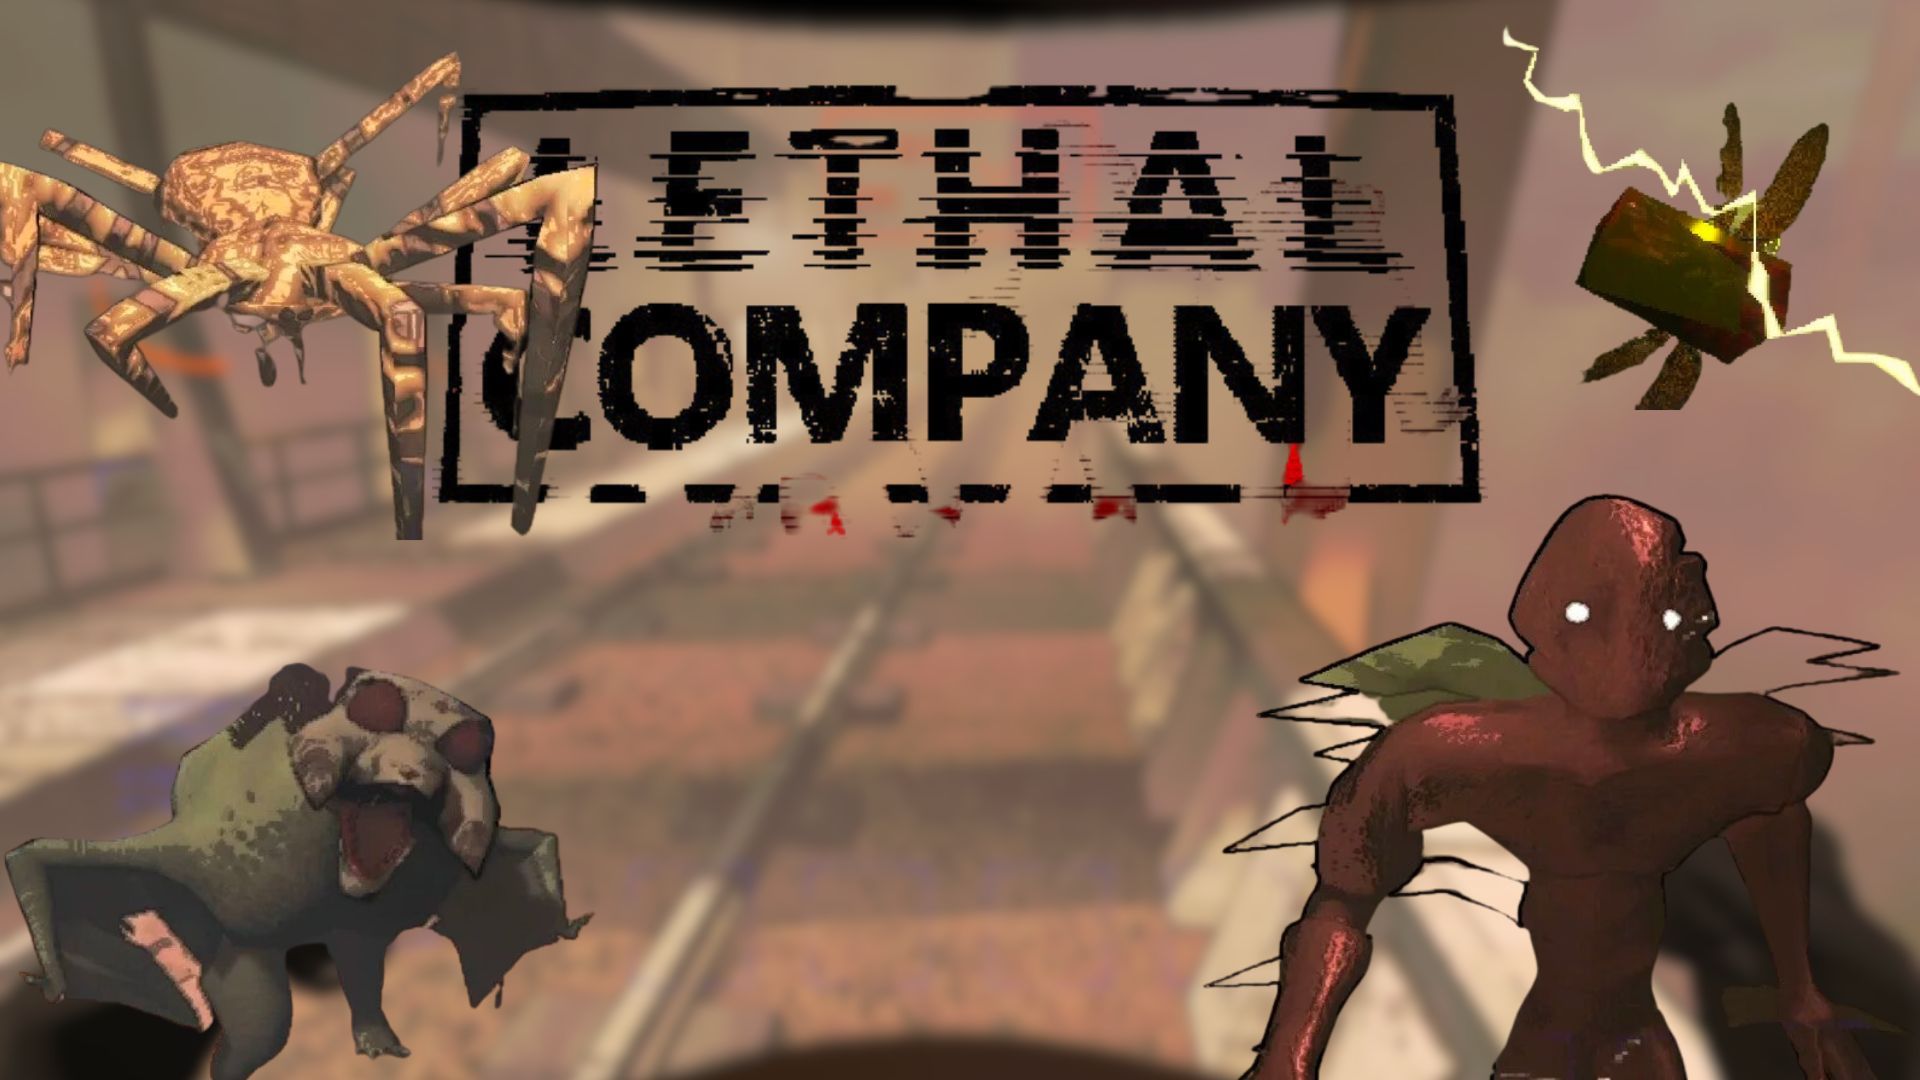 Lethal Company is Hiding Something… 